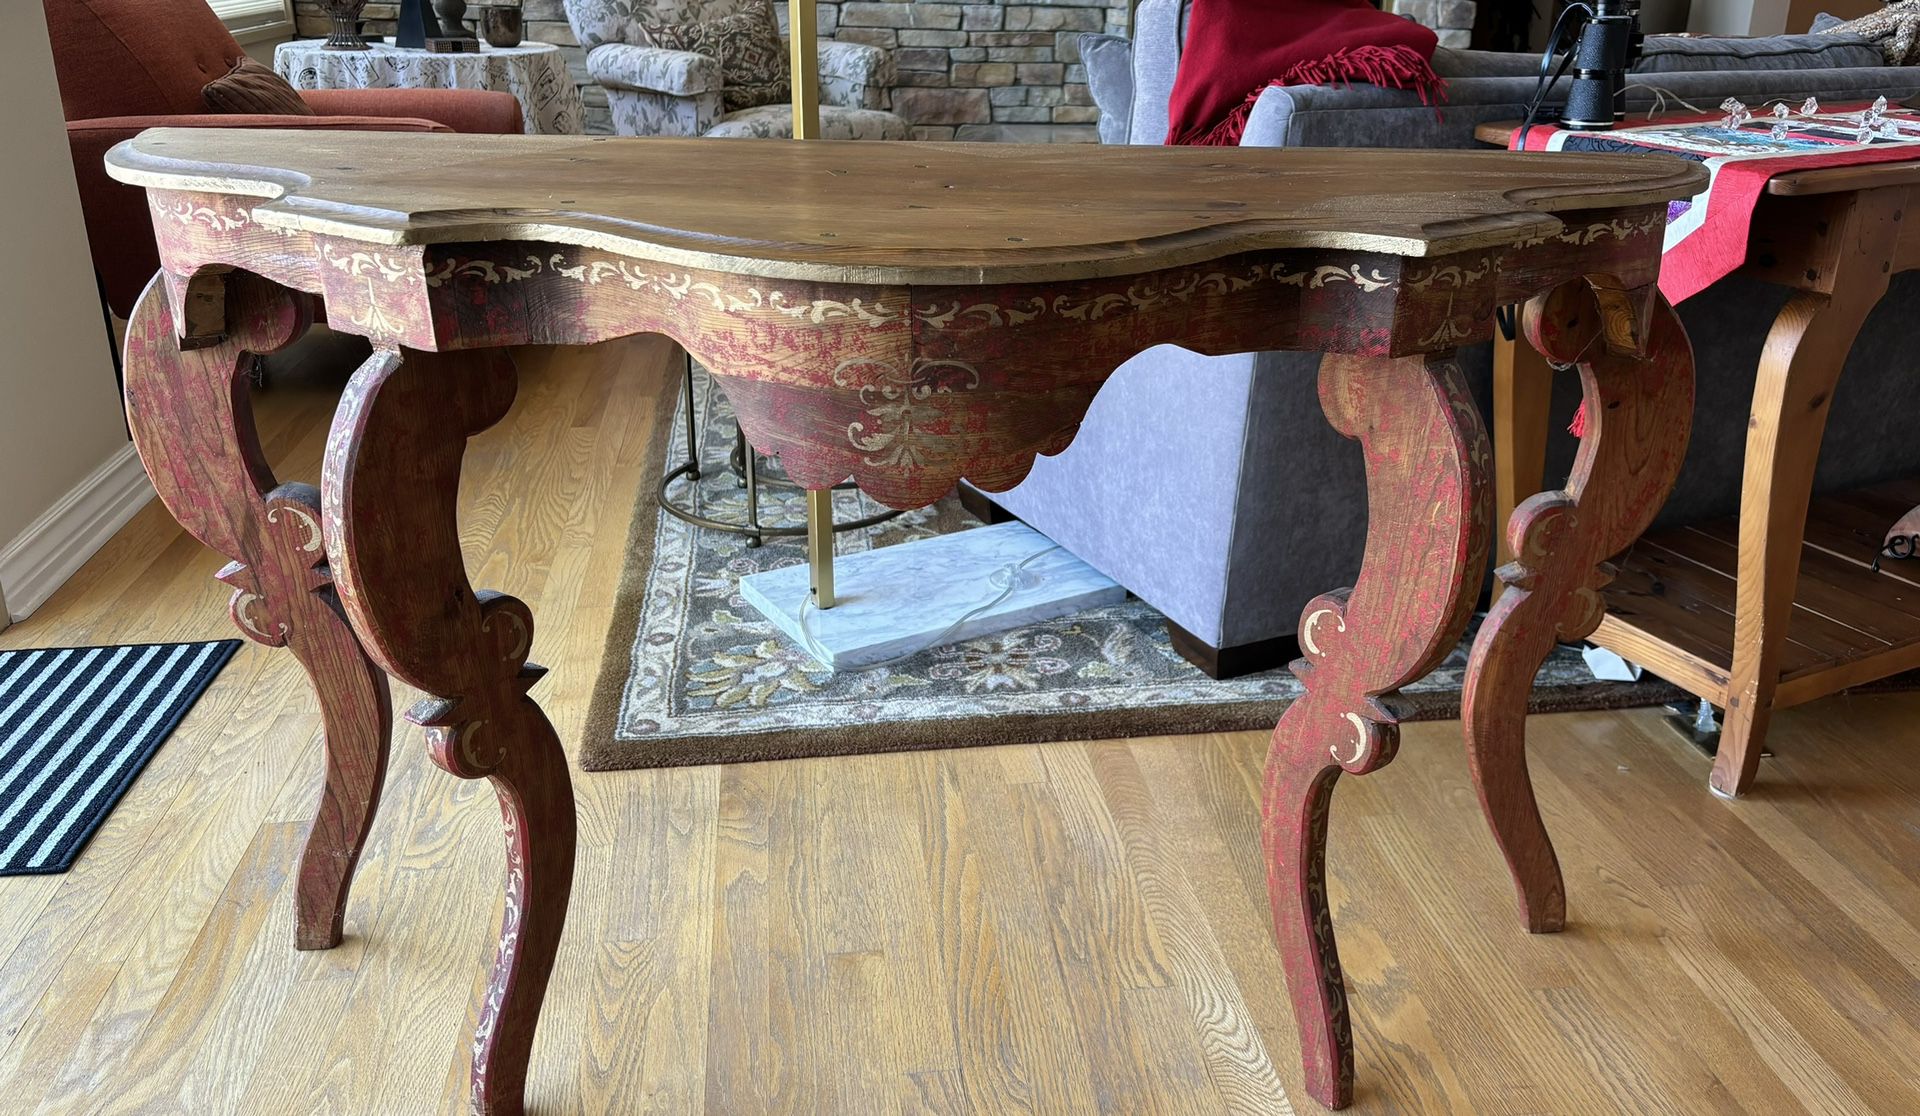 MOVING Need To Sell - Antique Console Table